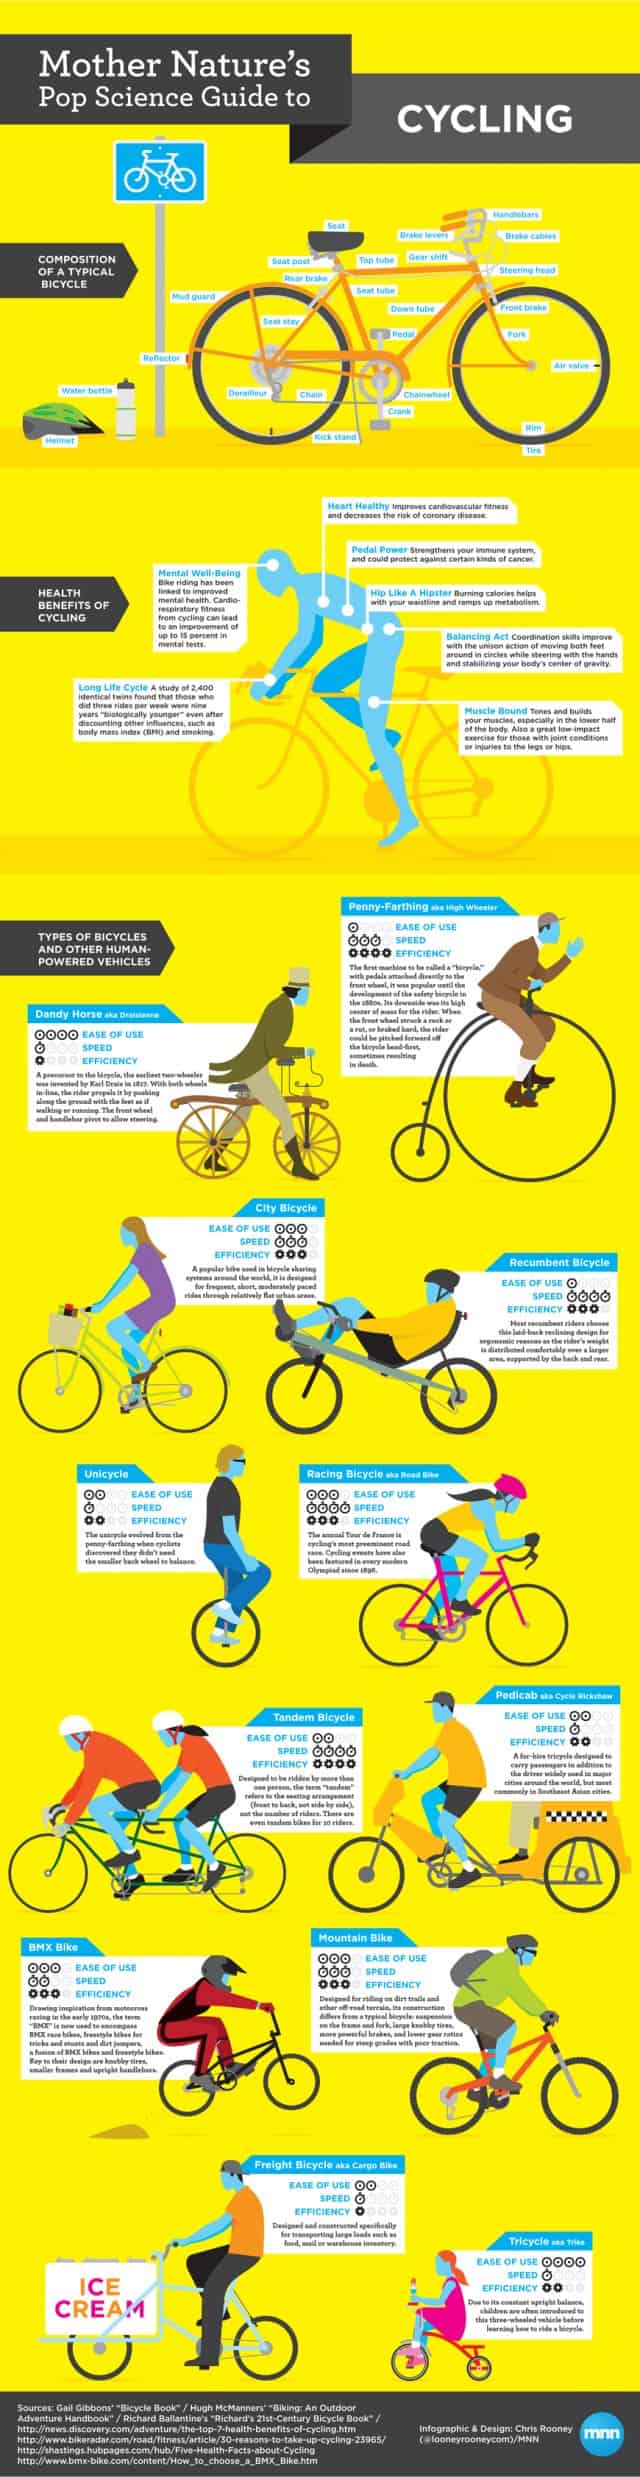 Mother Nature's Pop Science Guide to Cycling